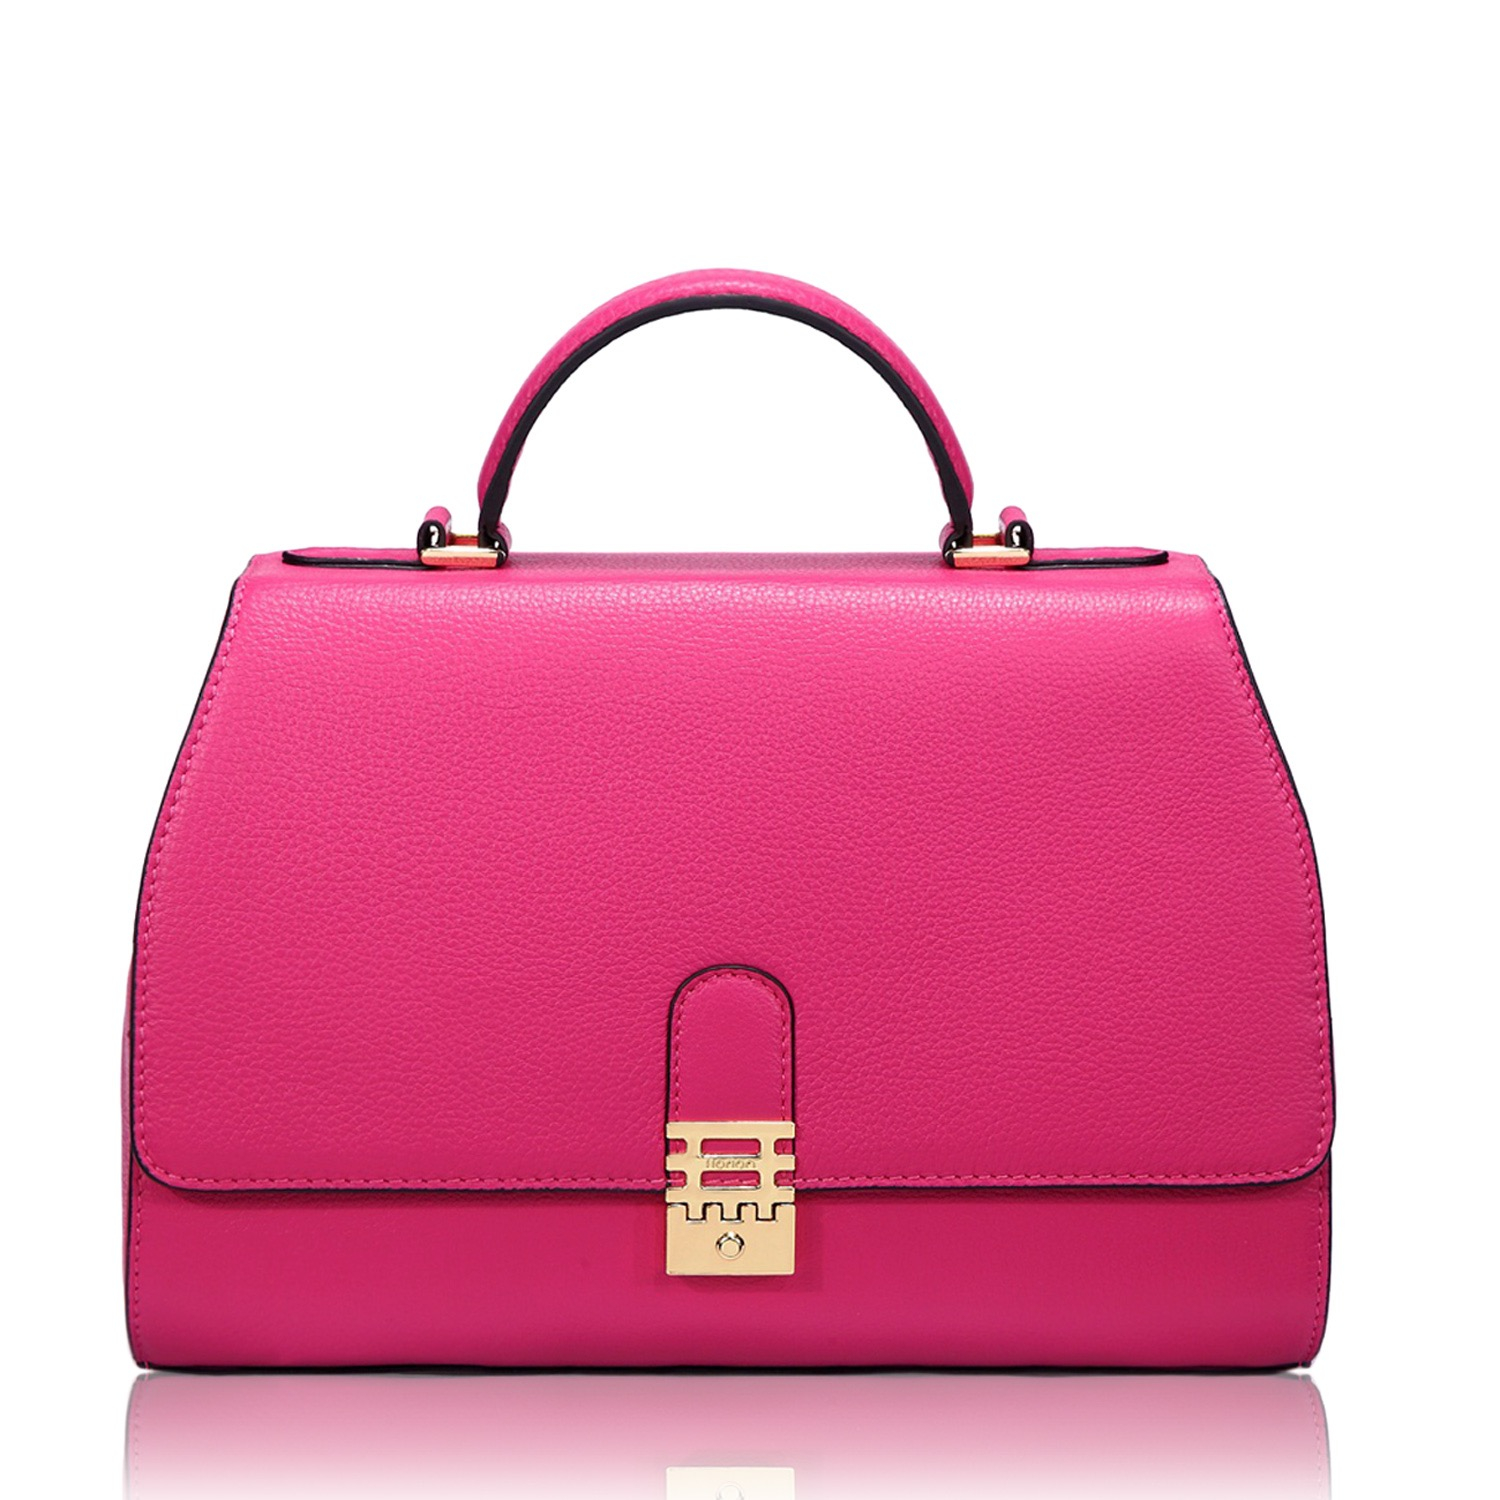 Florian london Vienna Tote Pink in Pink | Lyst